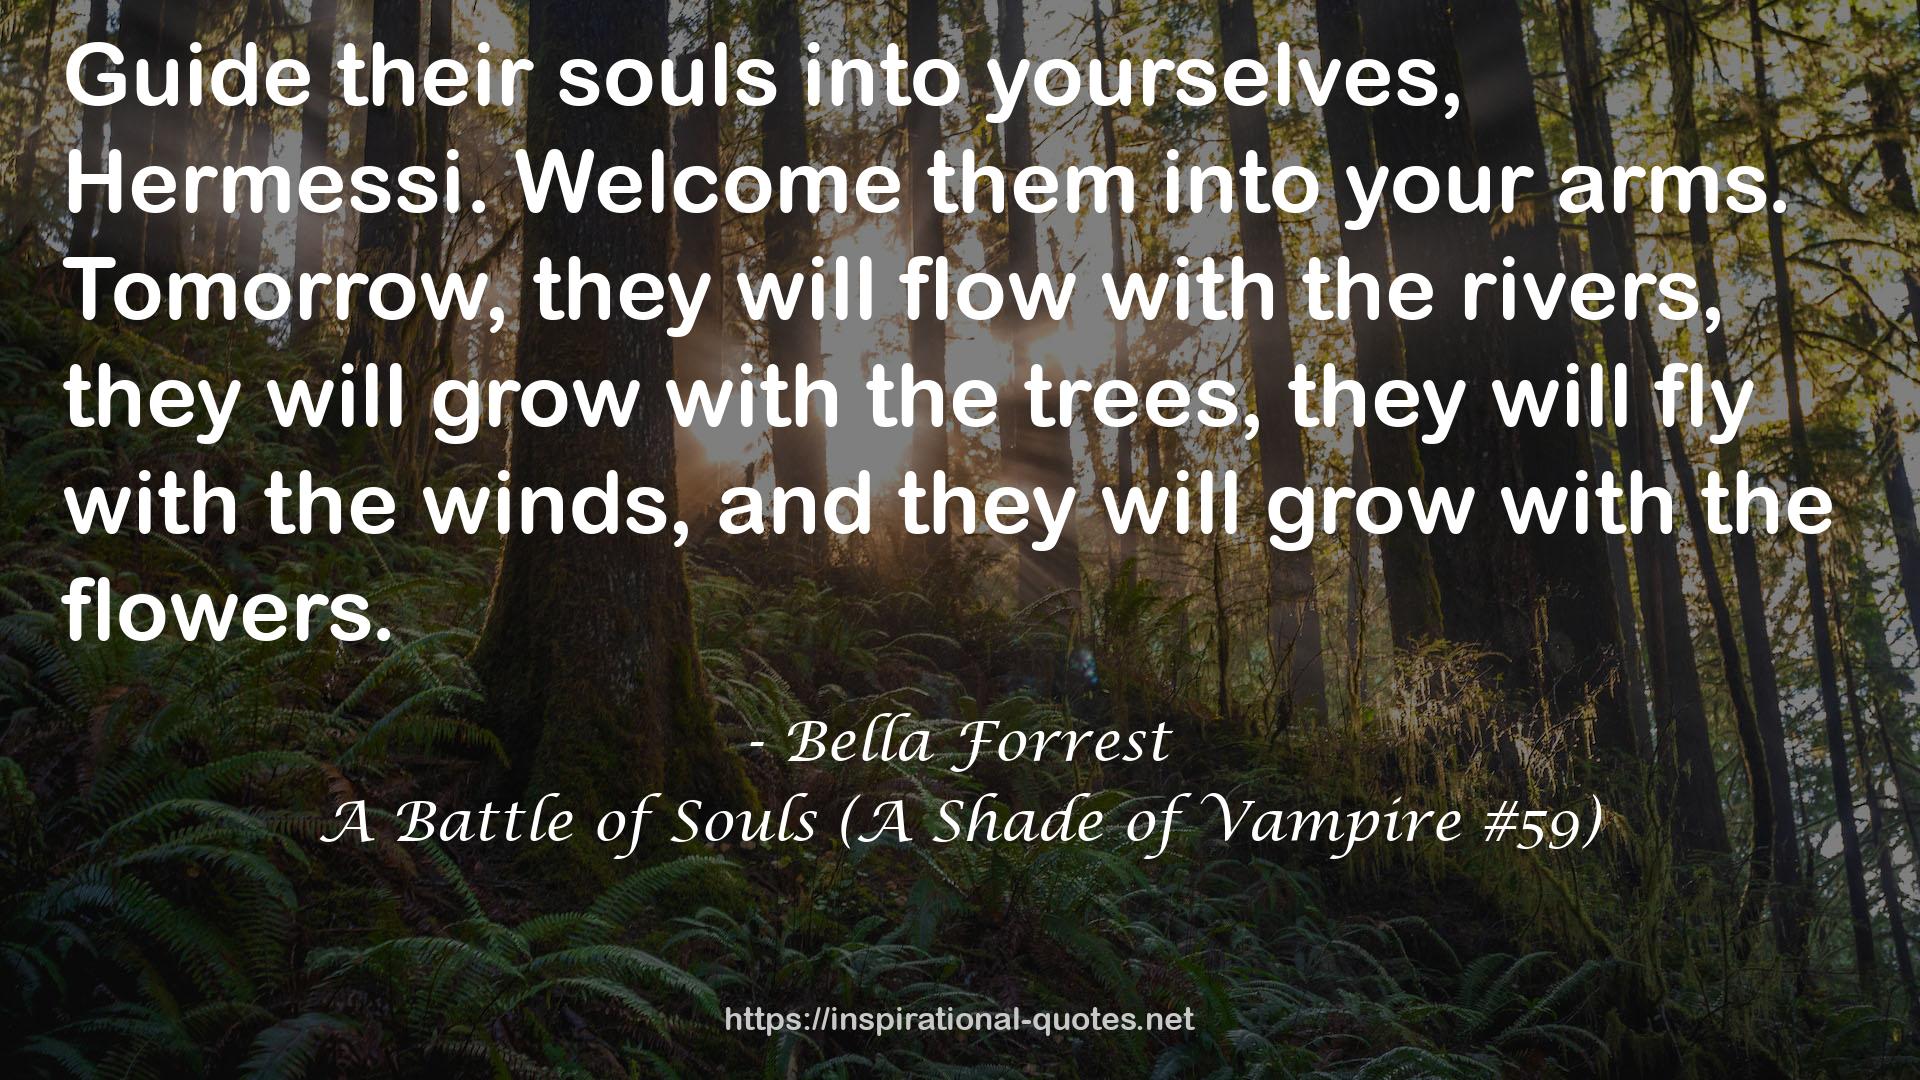 A Battle of Souls (A Shade of Vampire #59) QUOTES